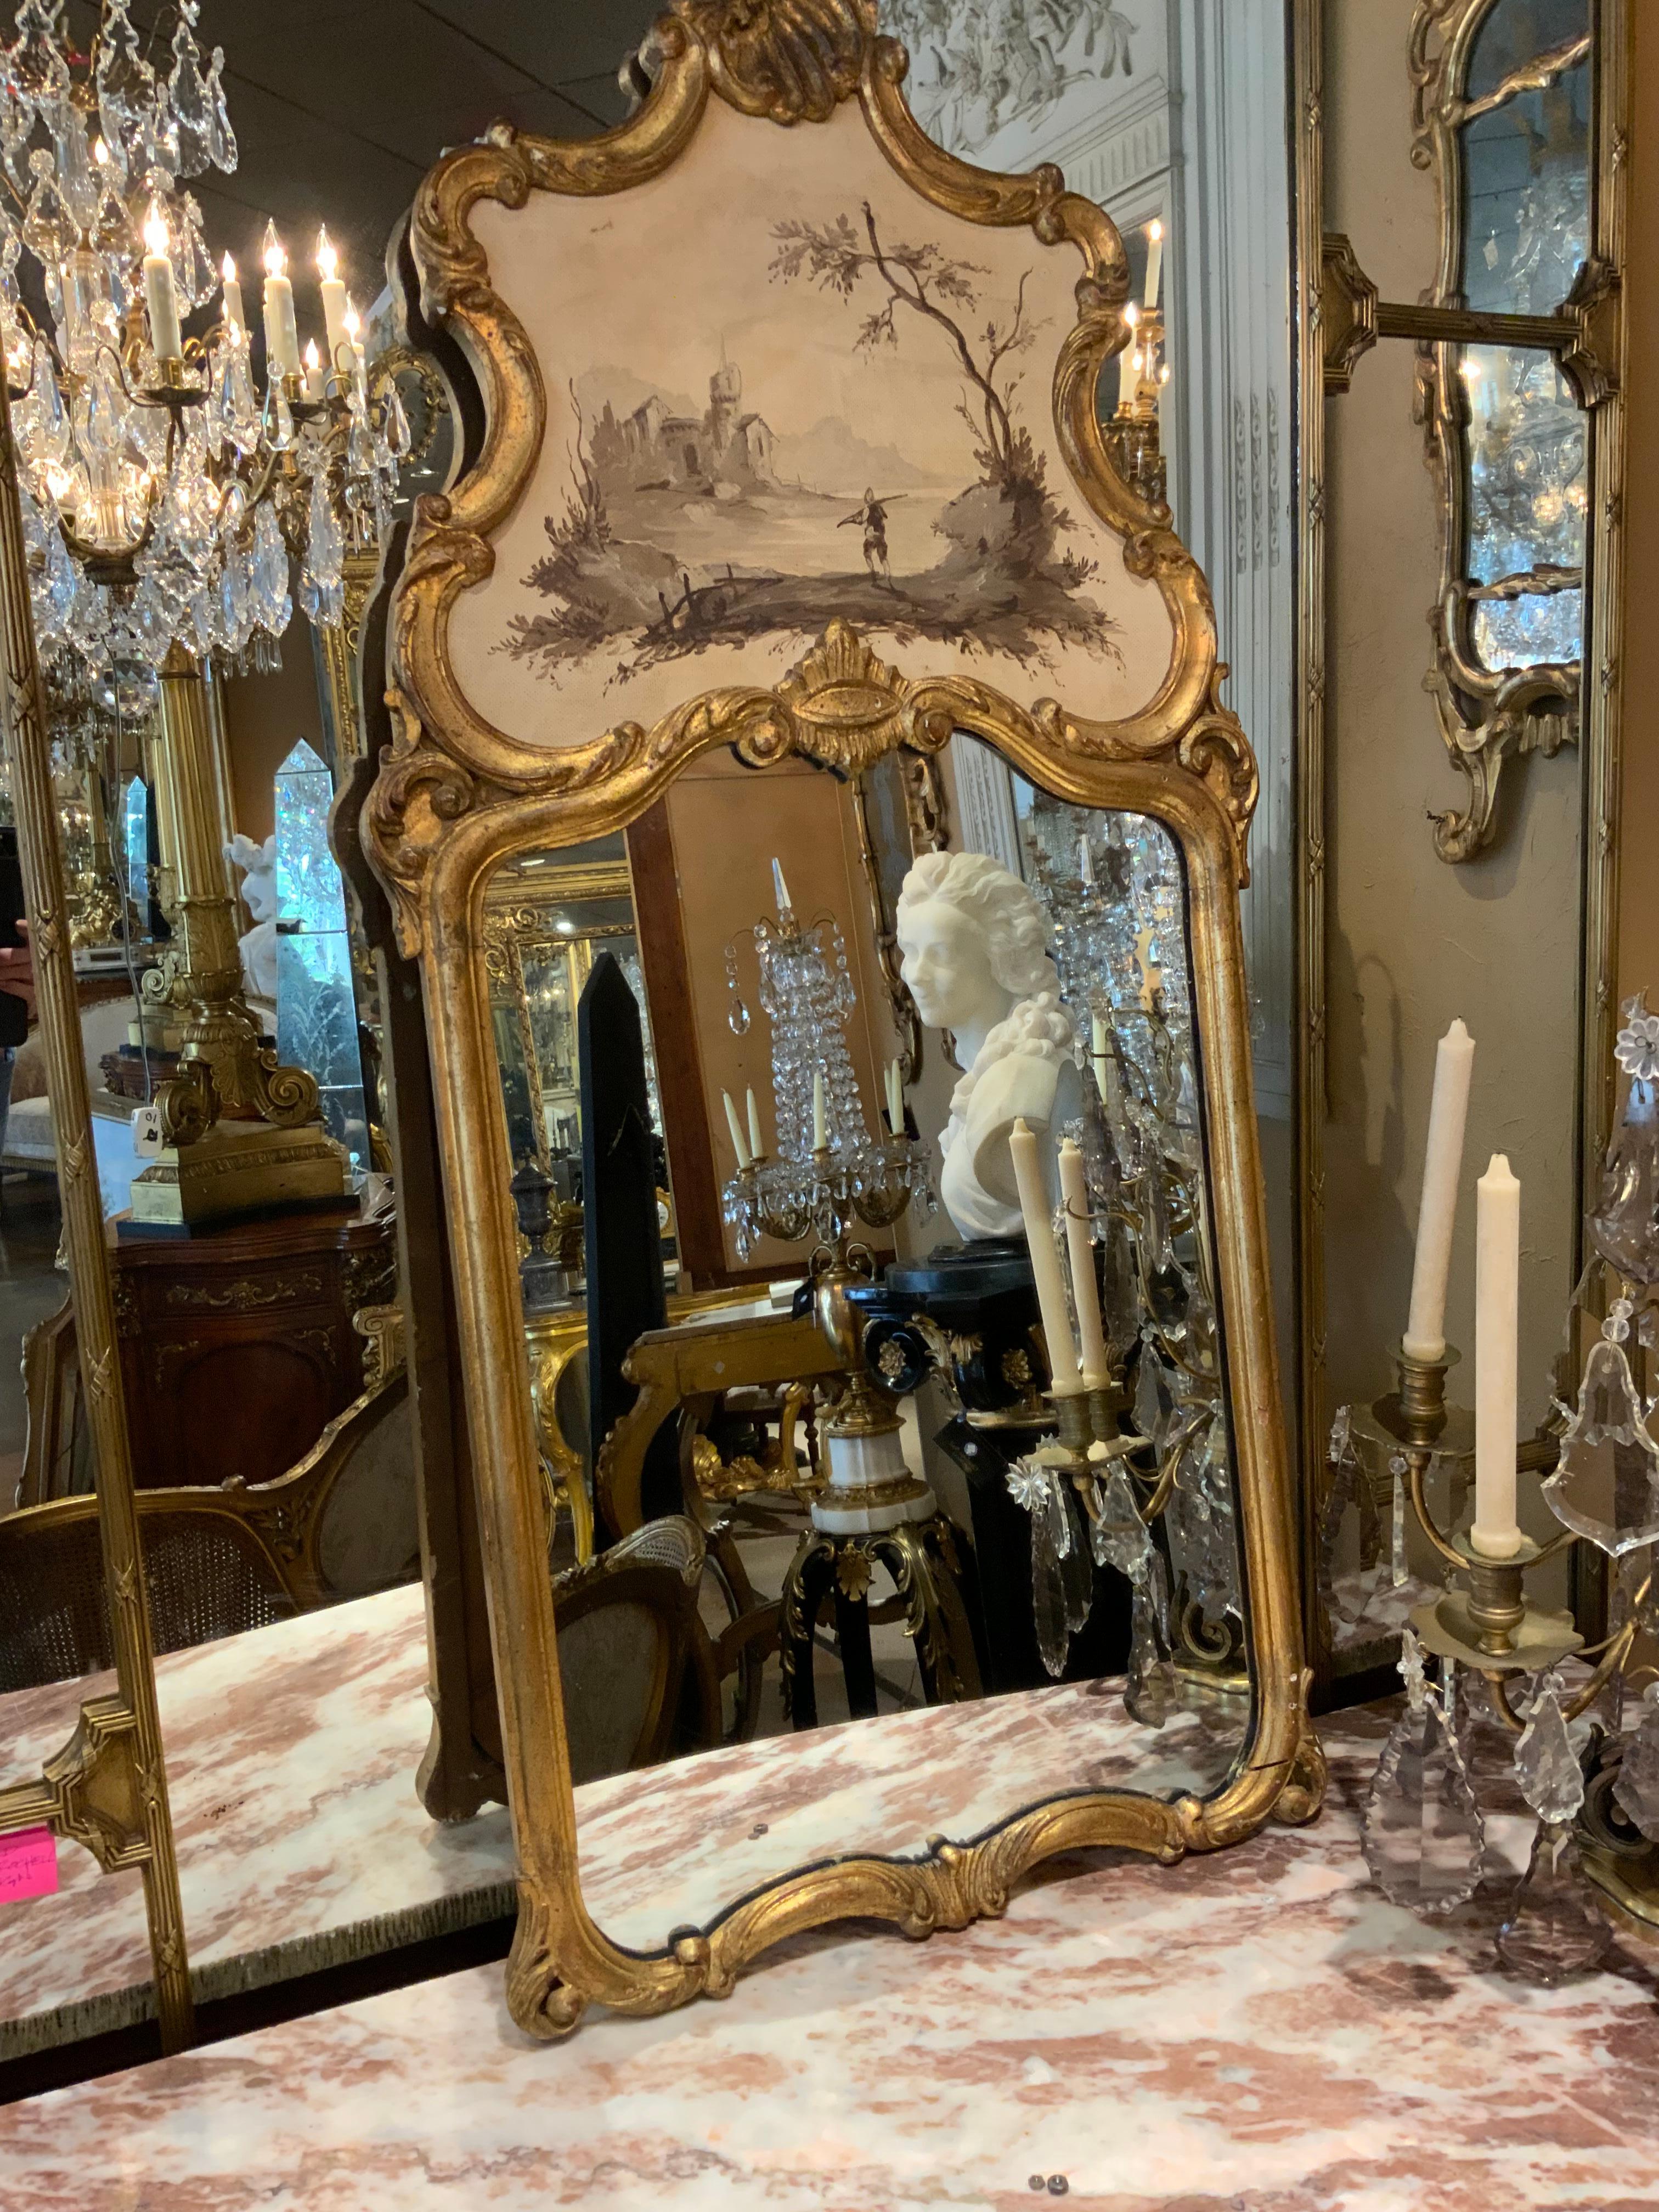 These exceptional mirrors are in the Venetian rococo taste.
They have scroll carved rococo surrounds with the upper
Tablets decorated with hand painted figures in landscapes
En grisaille. The background of the landscape is painted 
In a pale